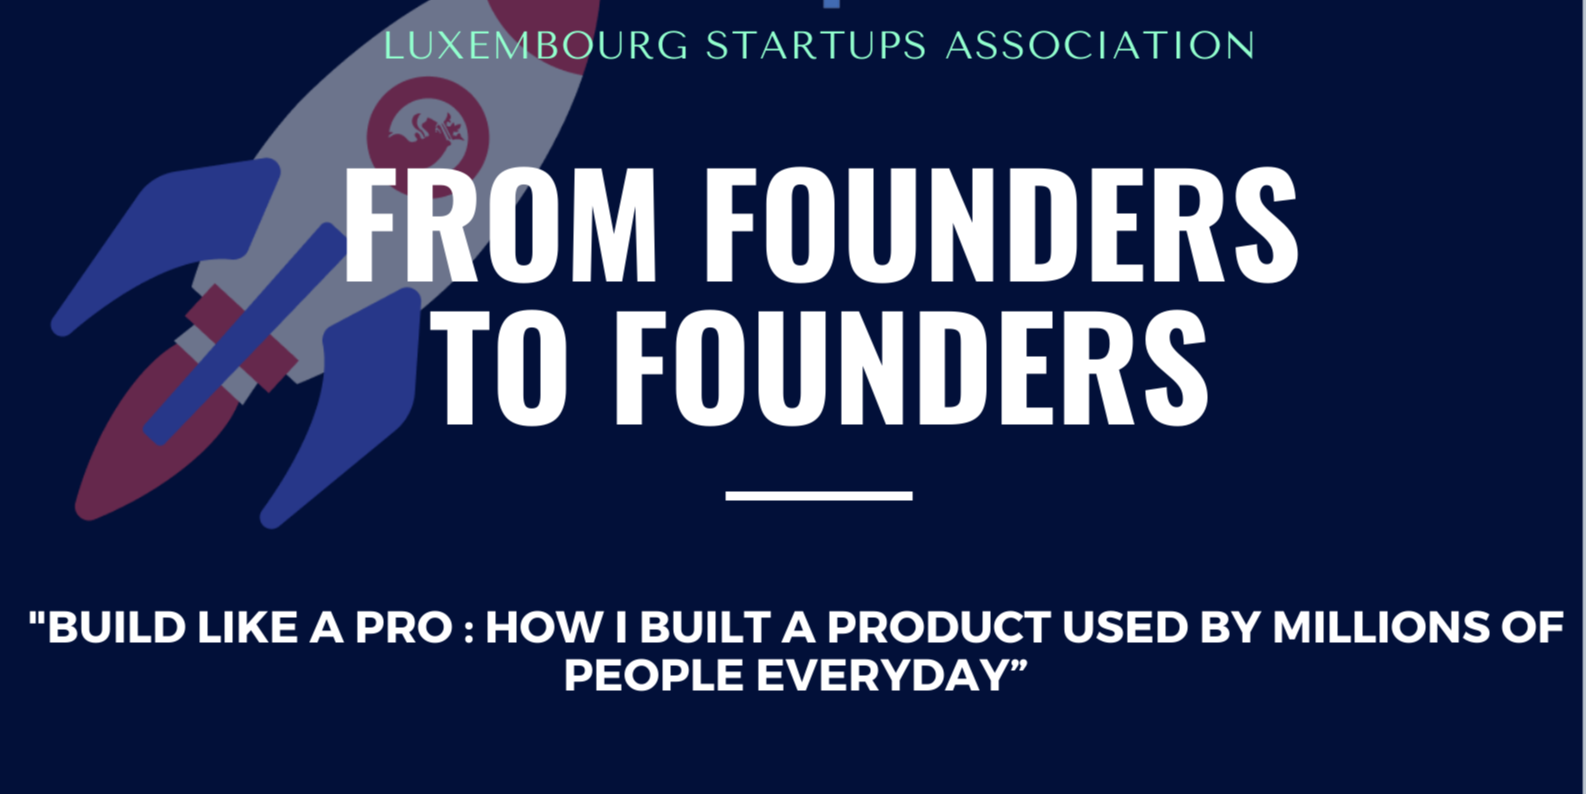 Startups-lu from founders to founders mars 2023